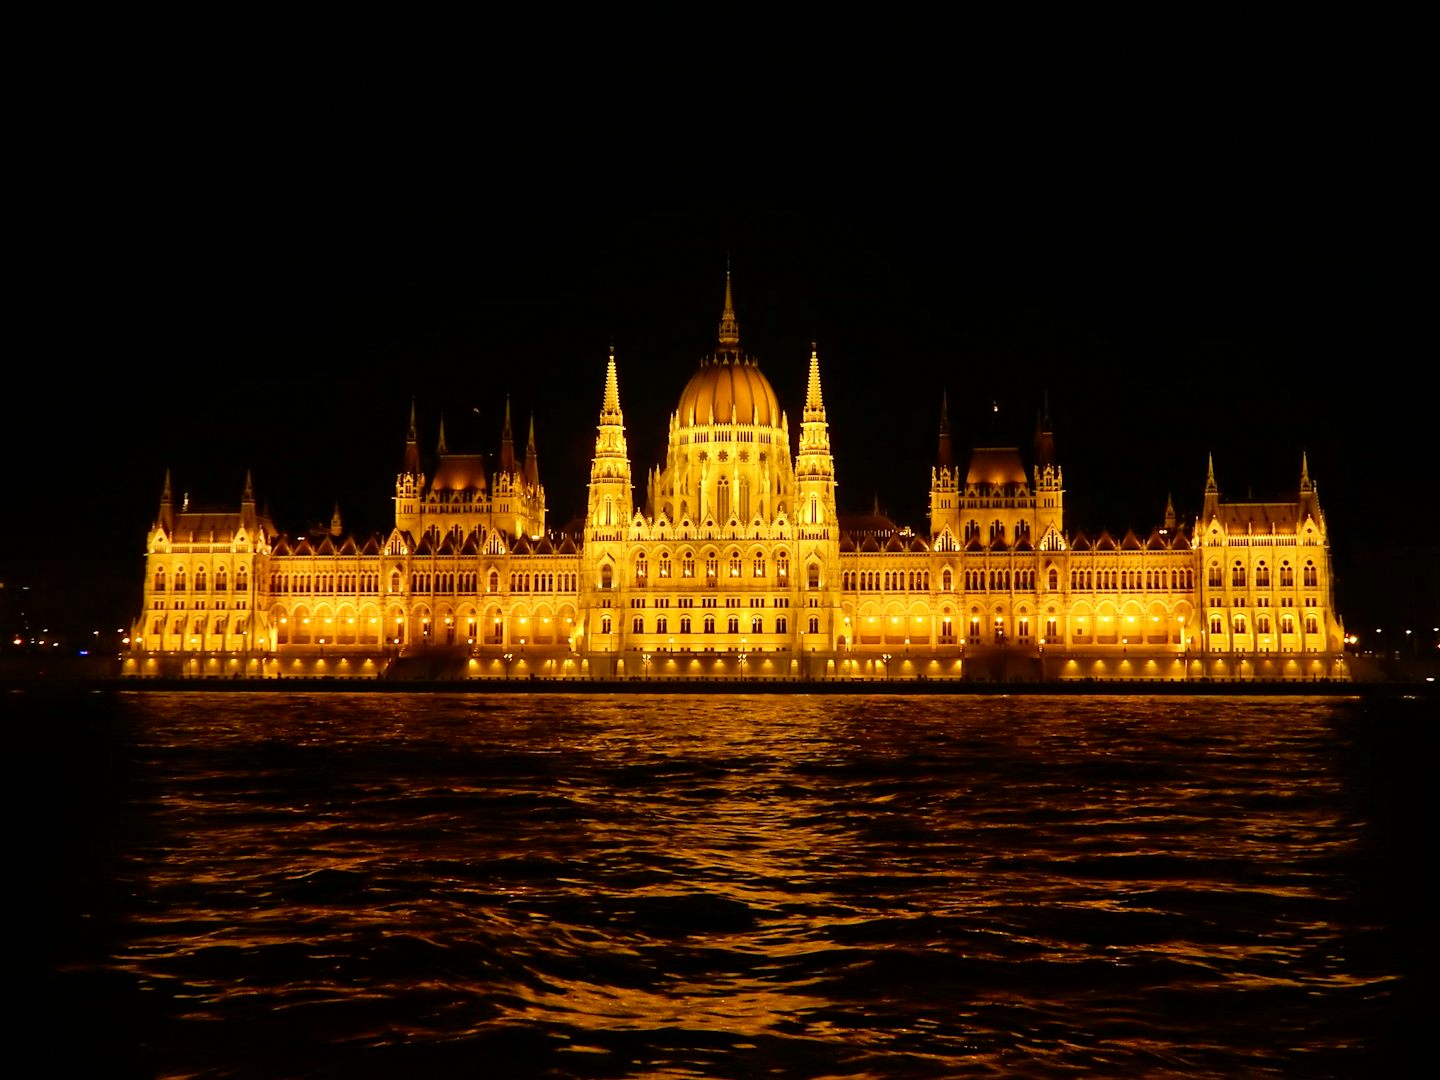 The parliament building at night.  Budapest, Hungary.